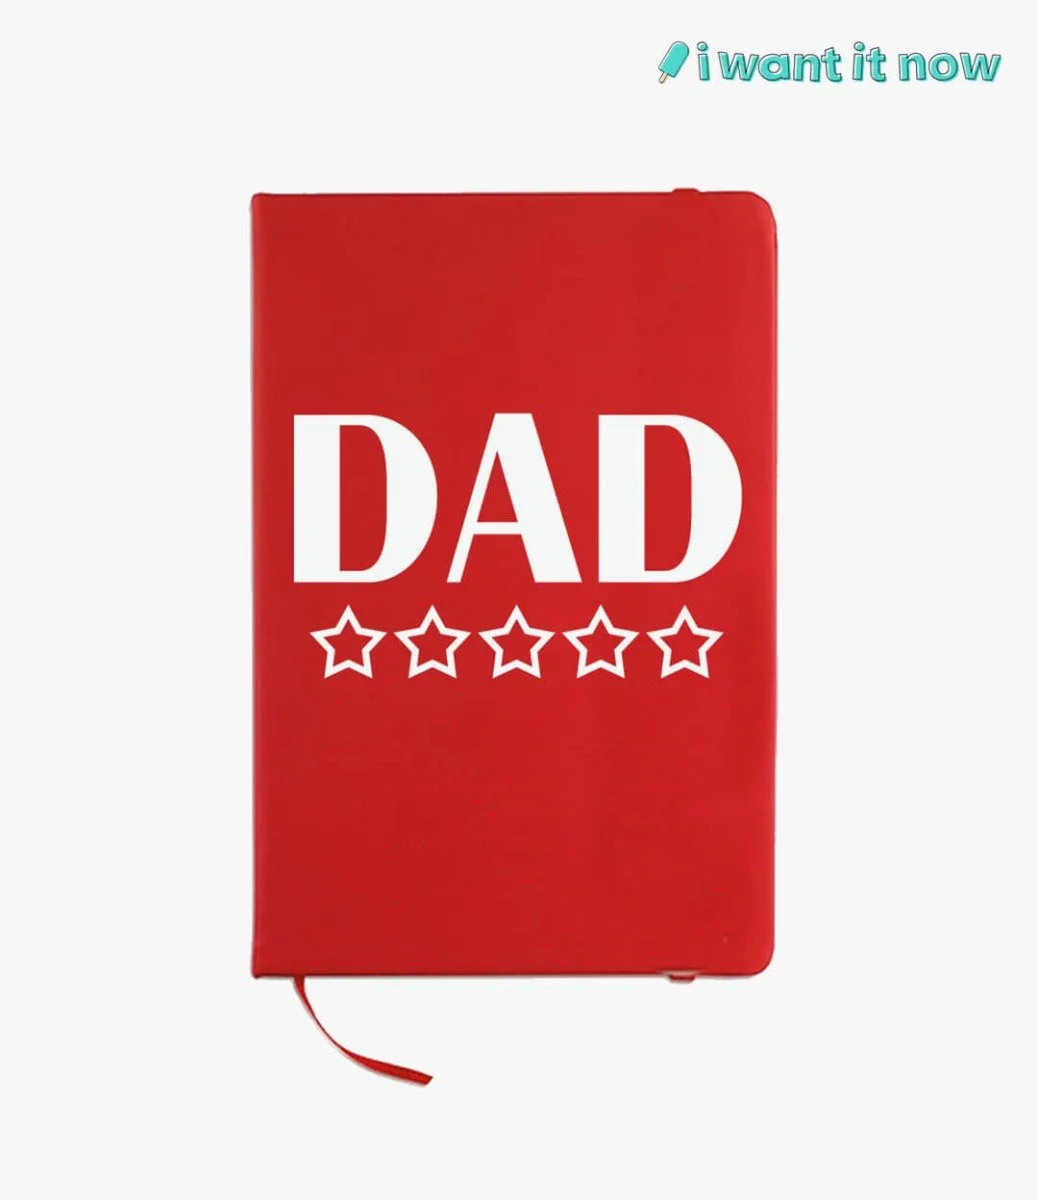 Dad 5 stars Notebook By I Want It Now